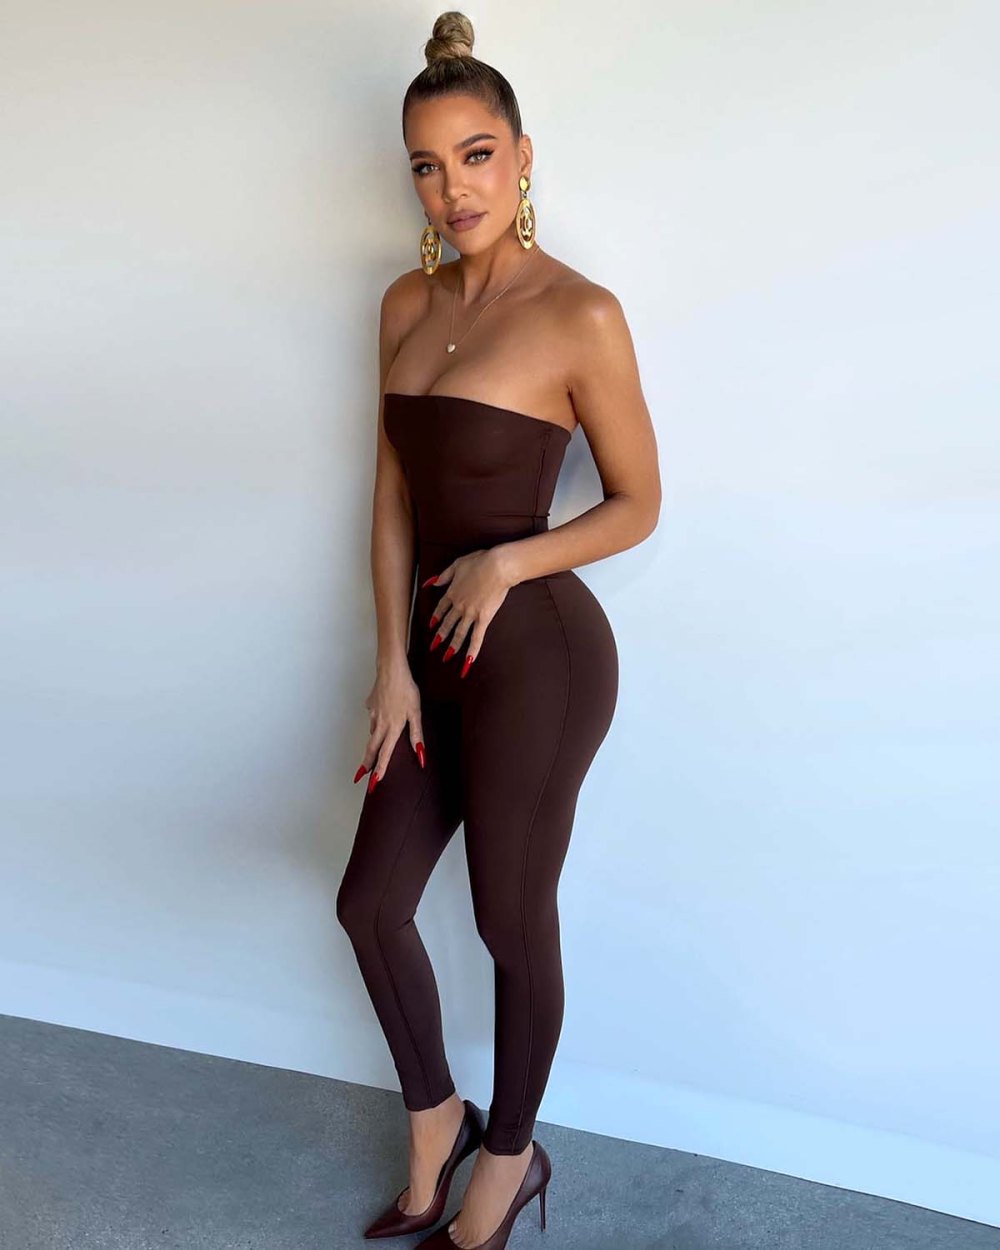 Celebrity approved skin-tight romper trend takes Instagram by